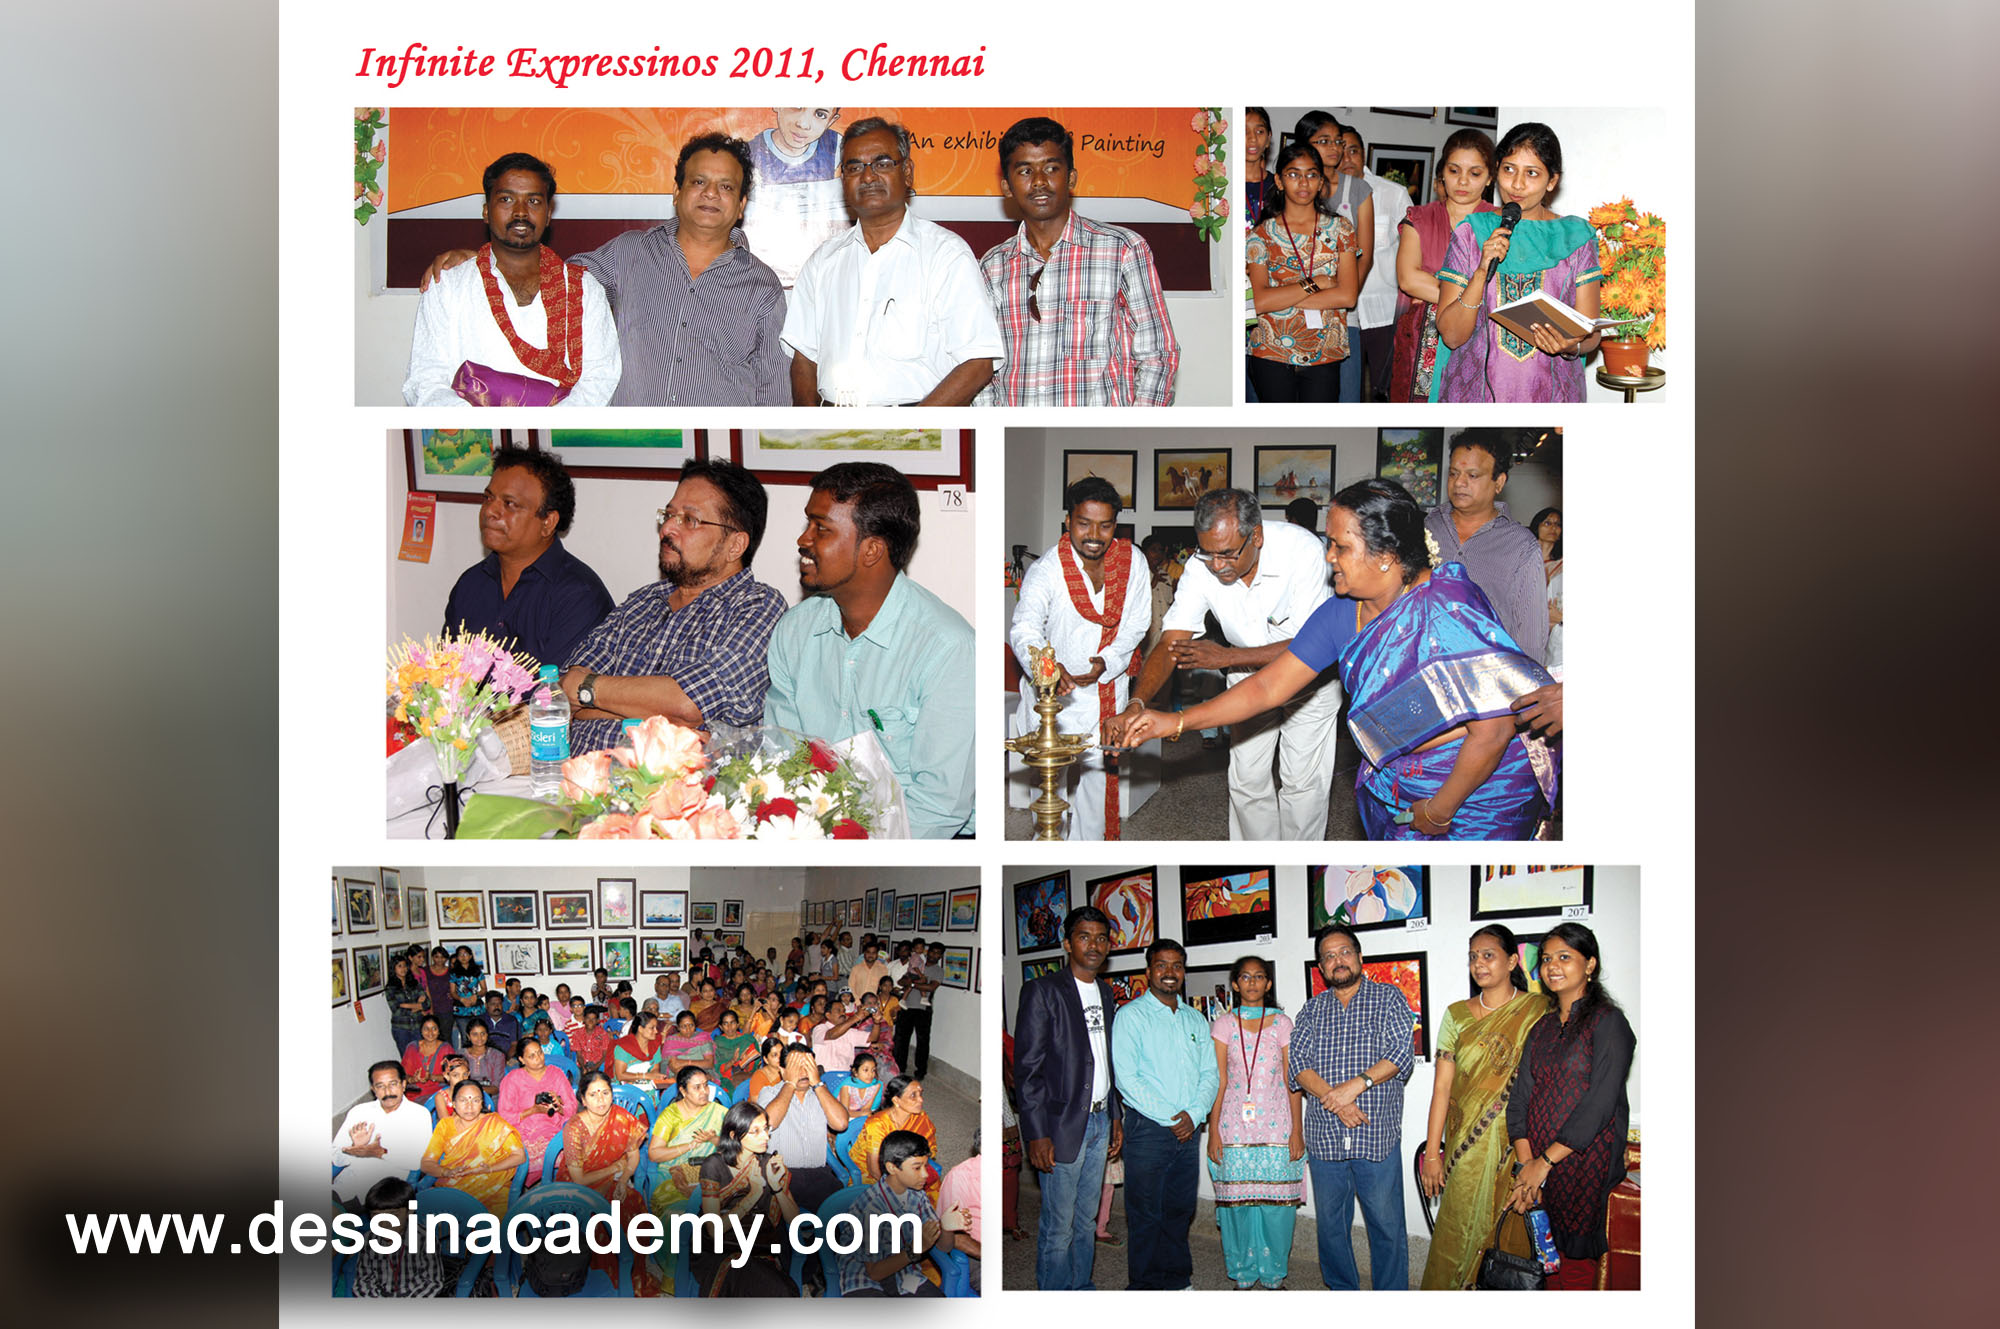 Dessin School of arts Event Gallery 5, Painting classes in ThirumullaivoyalSai Ram Academy